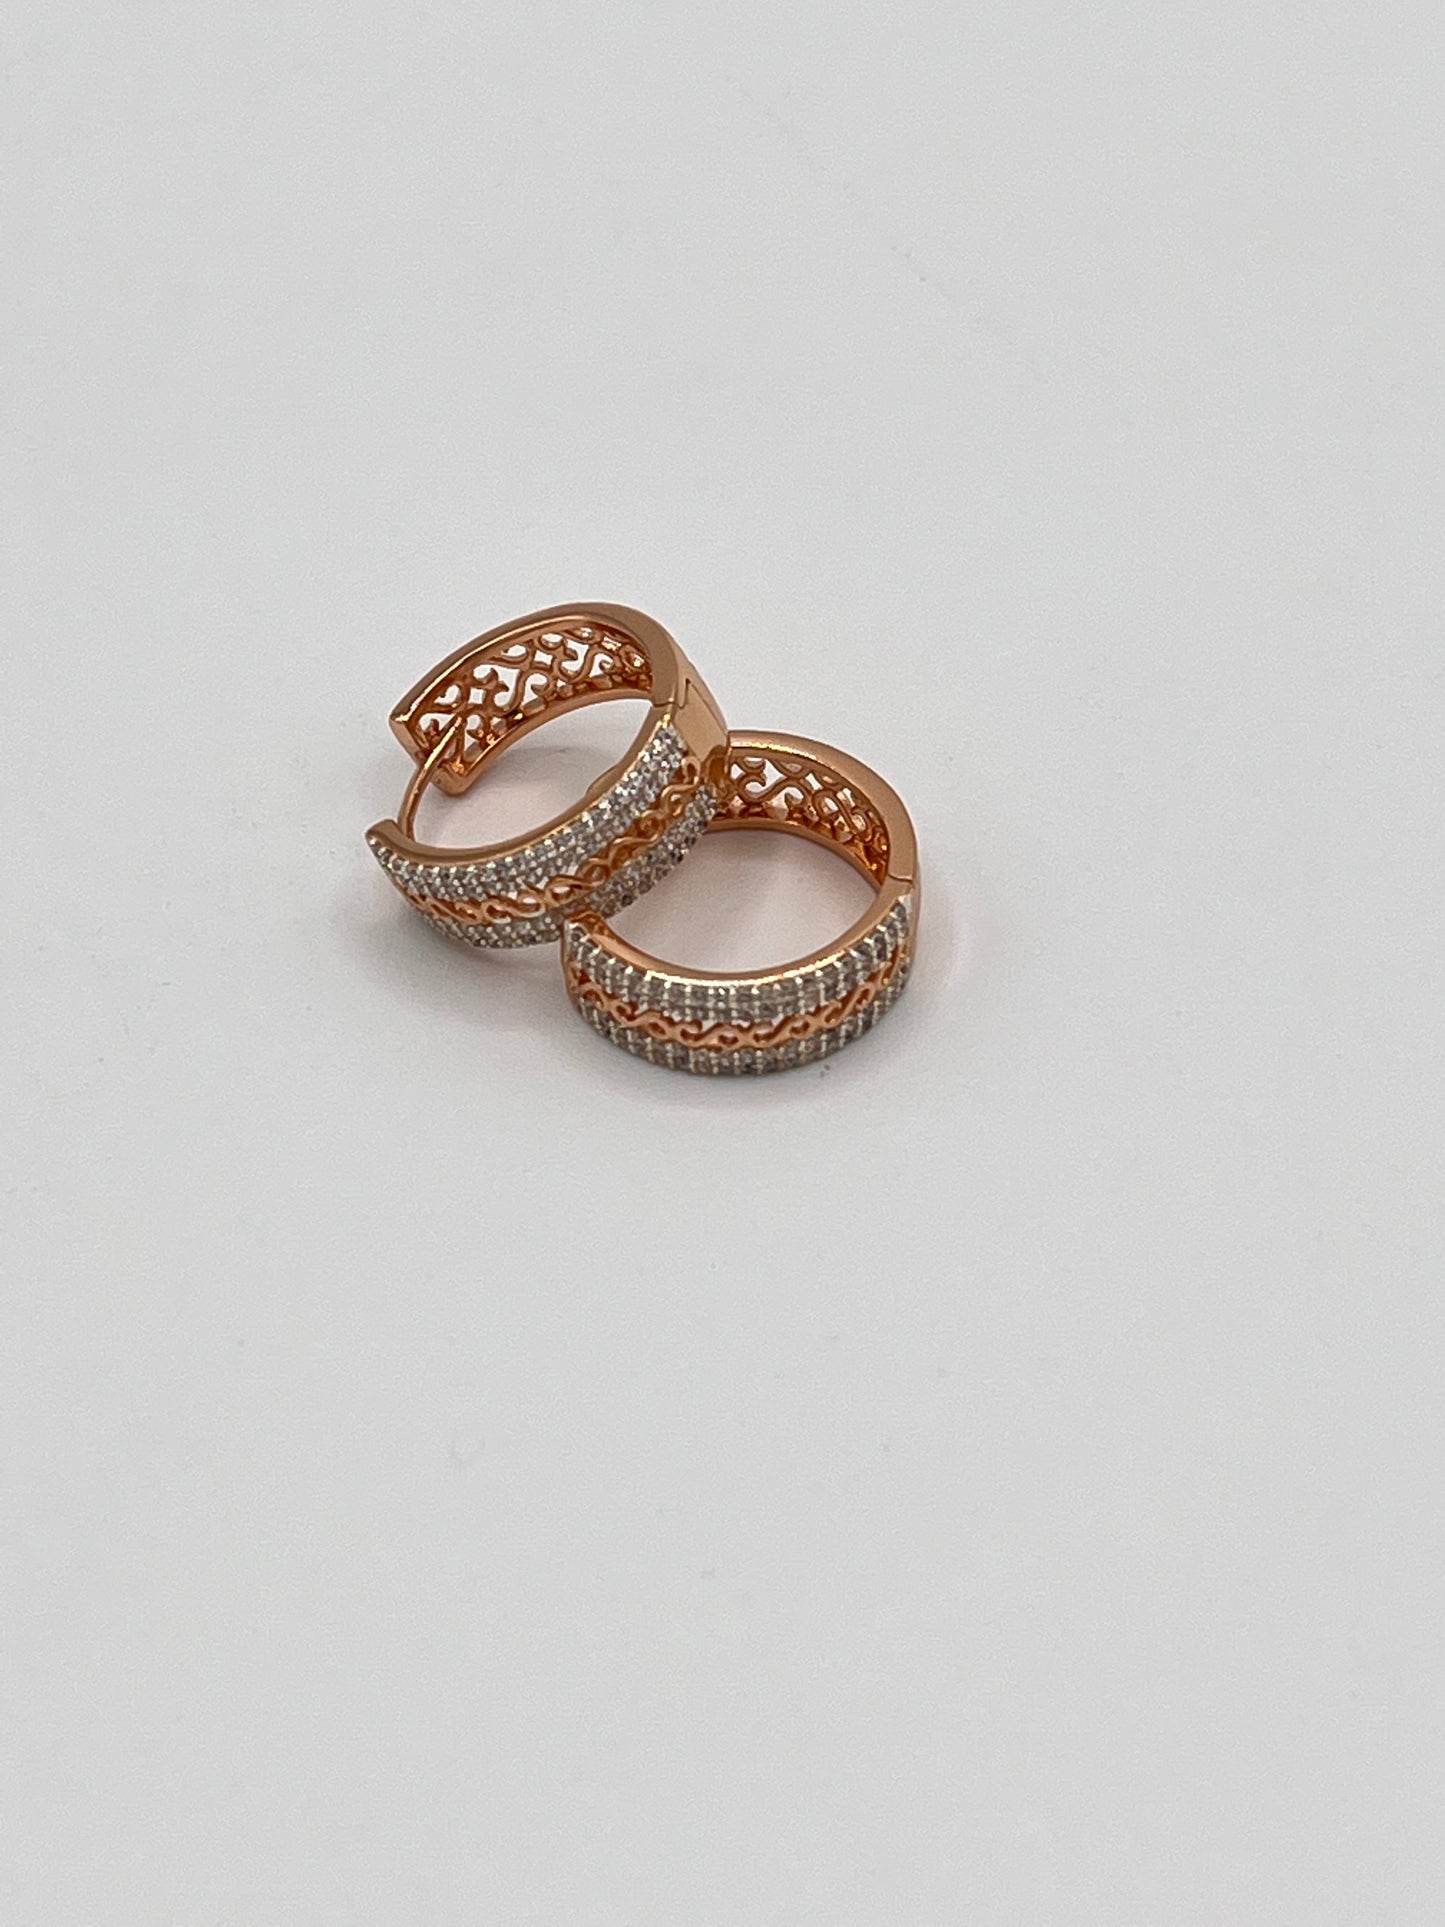 Mesh In The Middle Rose Gold Earring Hoops